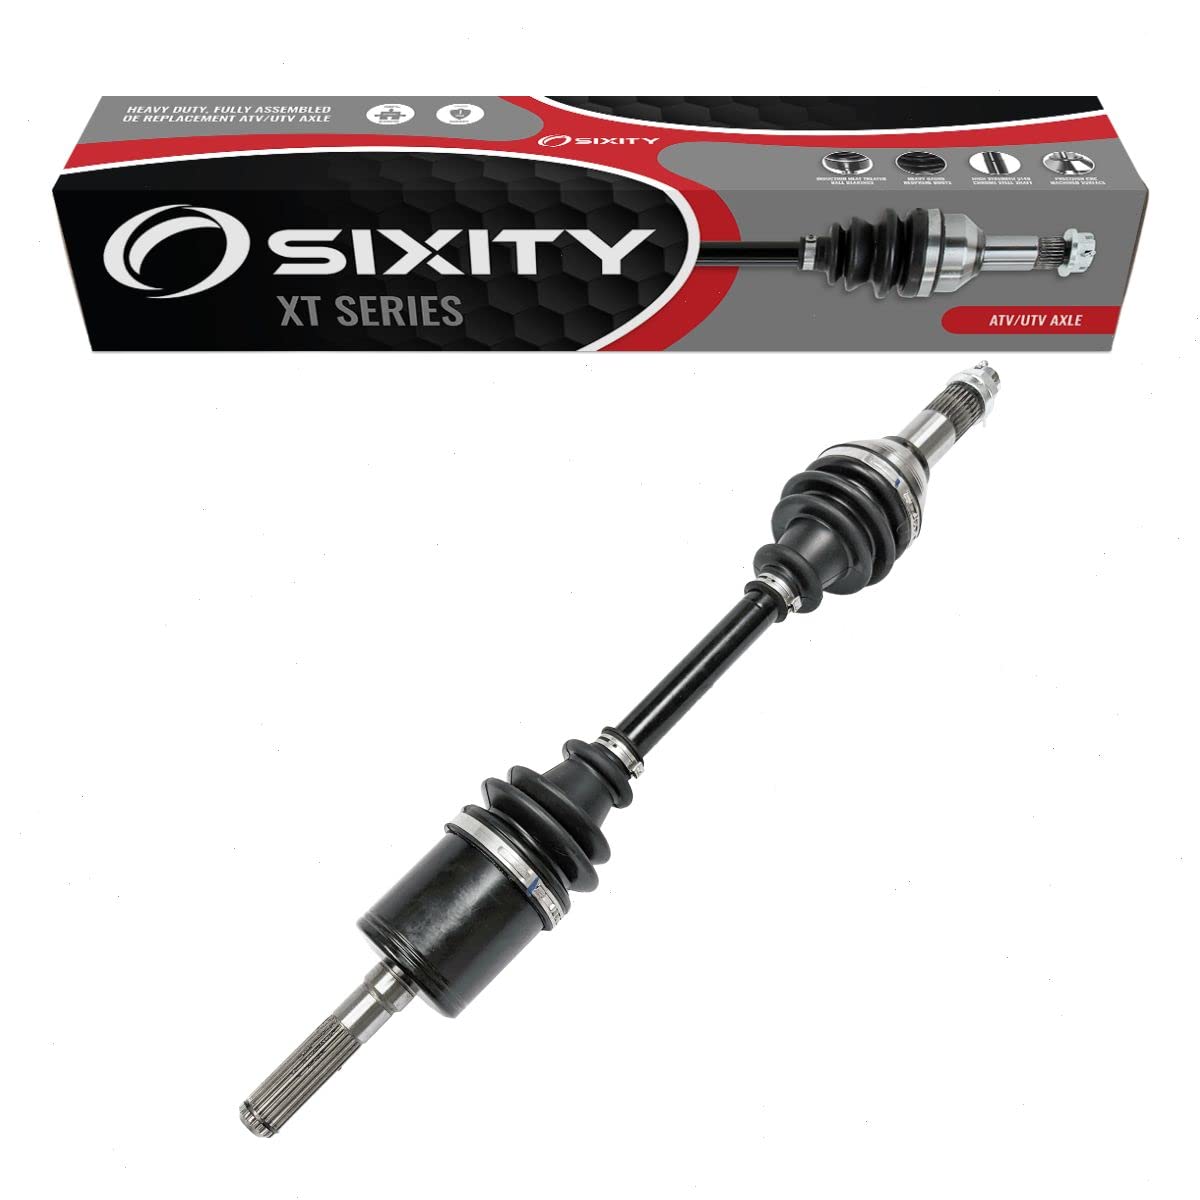 Sixity XT Front Left Axle compatible with Can-Am Maverick Trail 1000 DPS 1000R 800 800R 2018-2021